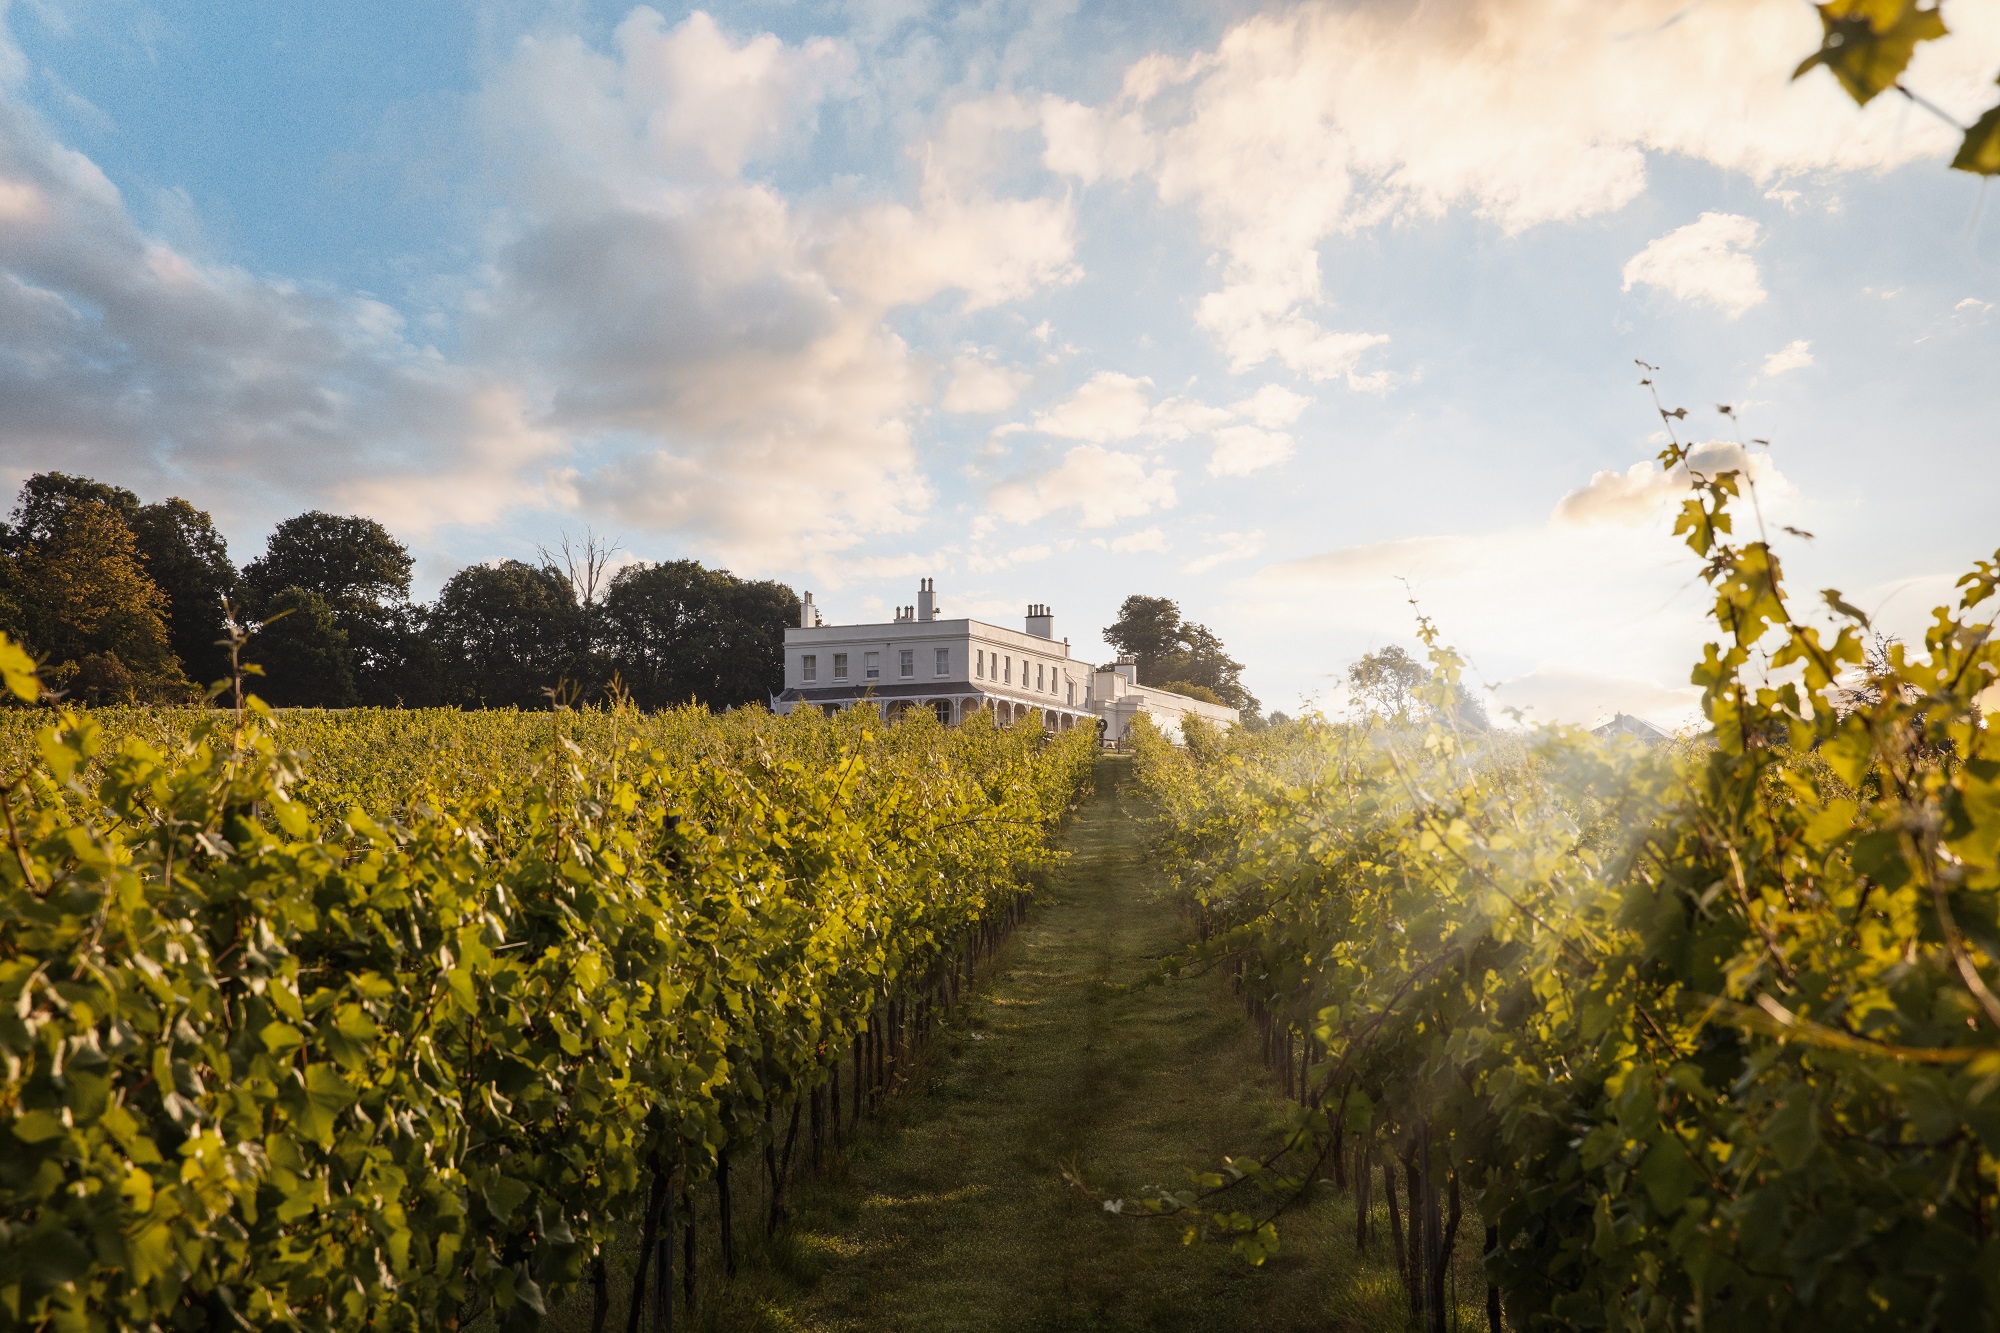 Lympstone Manor House and Vineyard with sun rising behind